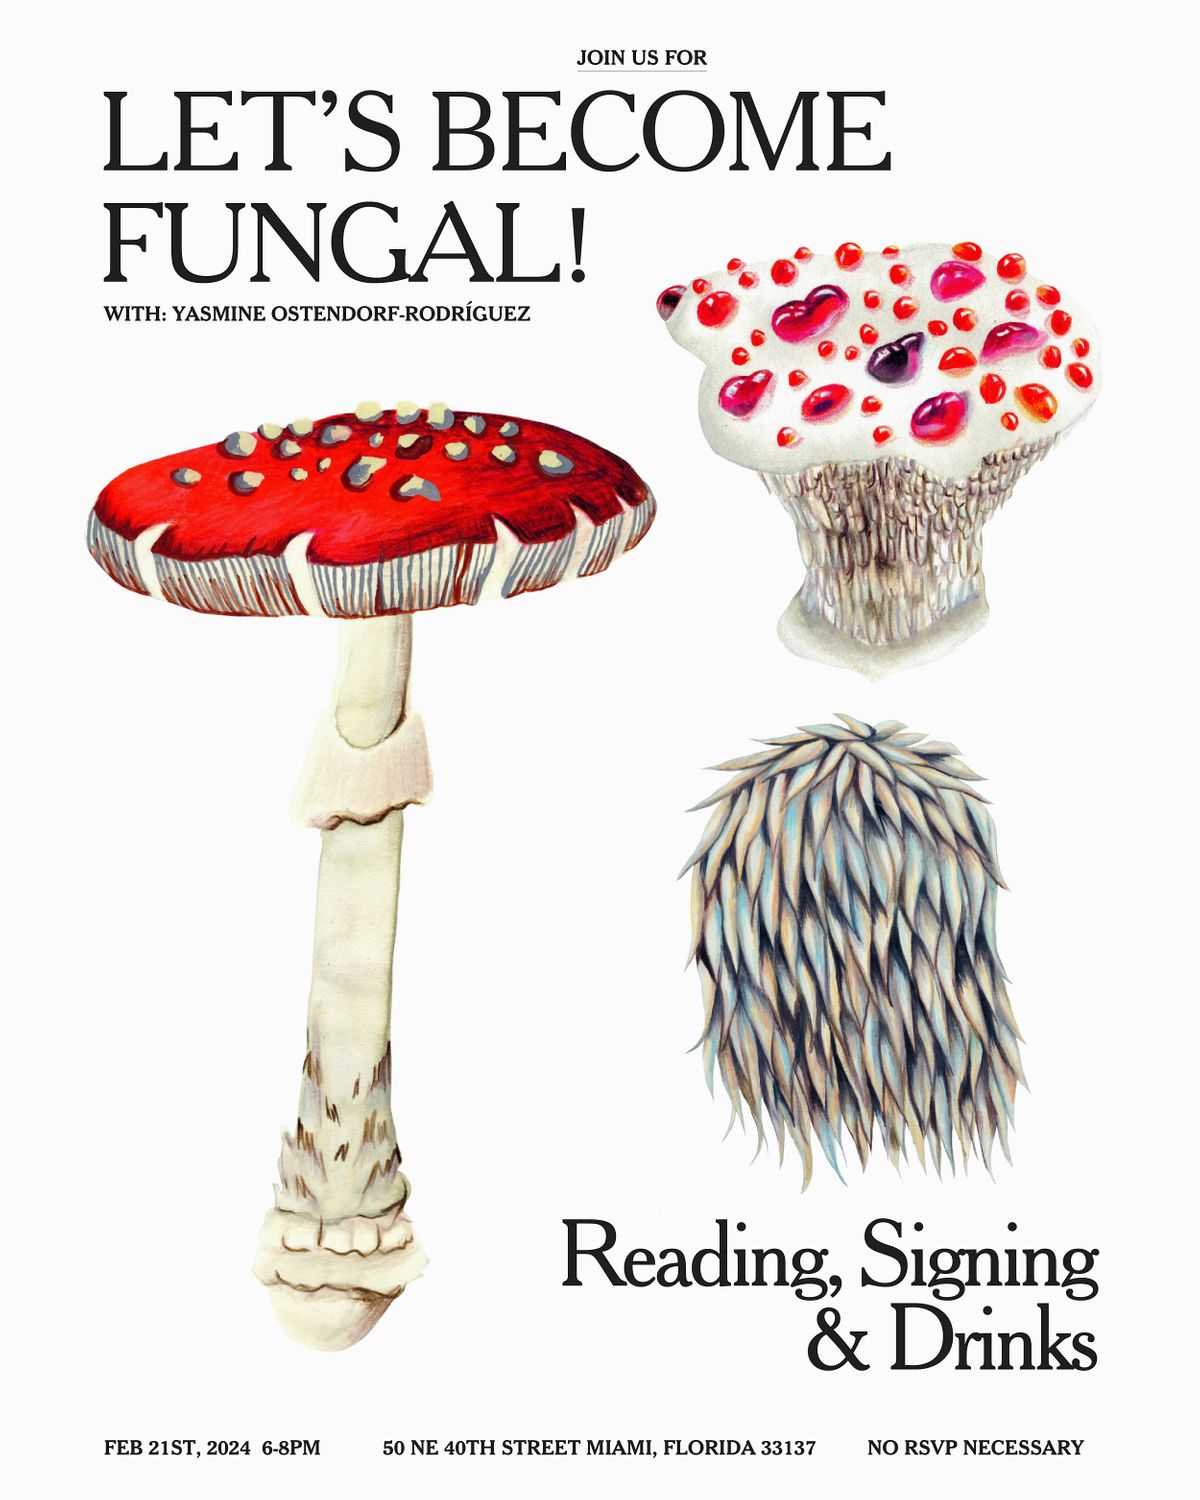 Lets All Become Fungal! with Yasmine Ostendorf-Rodriguez